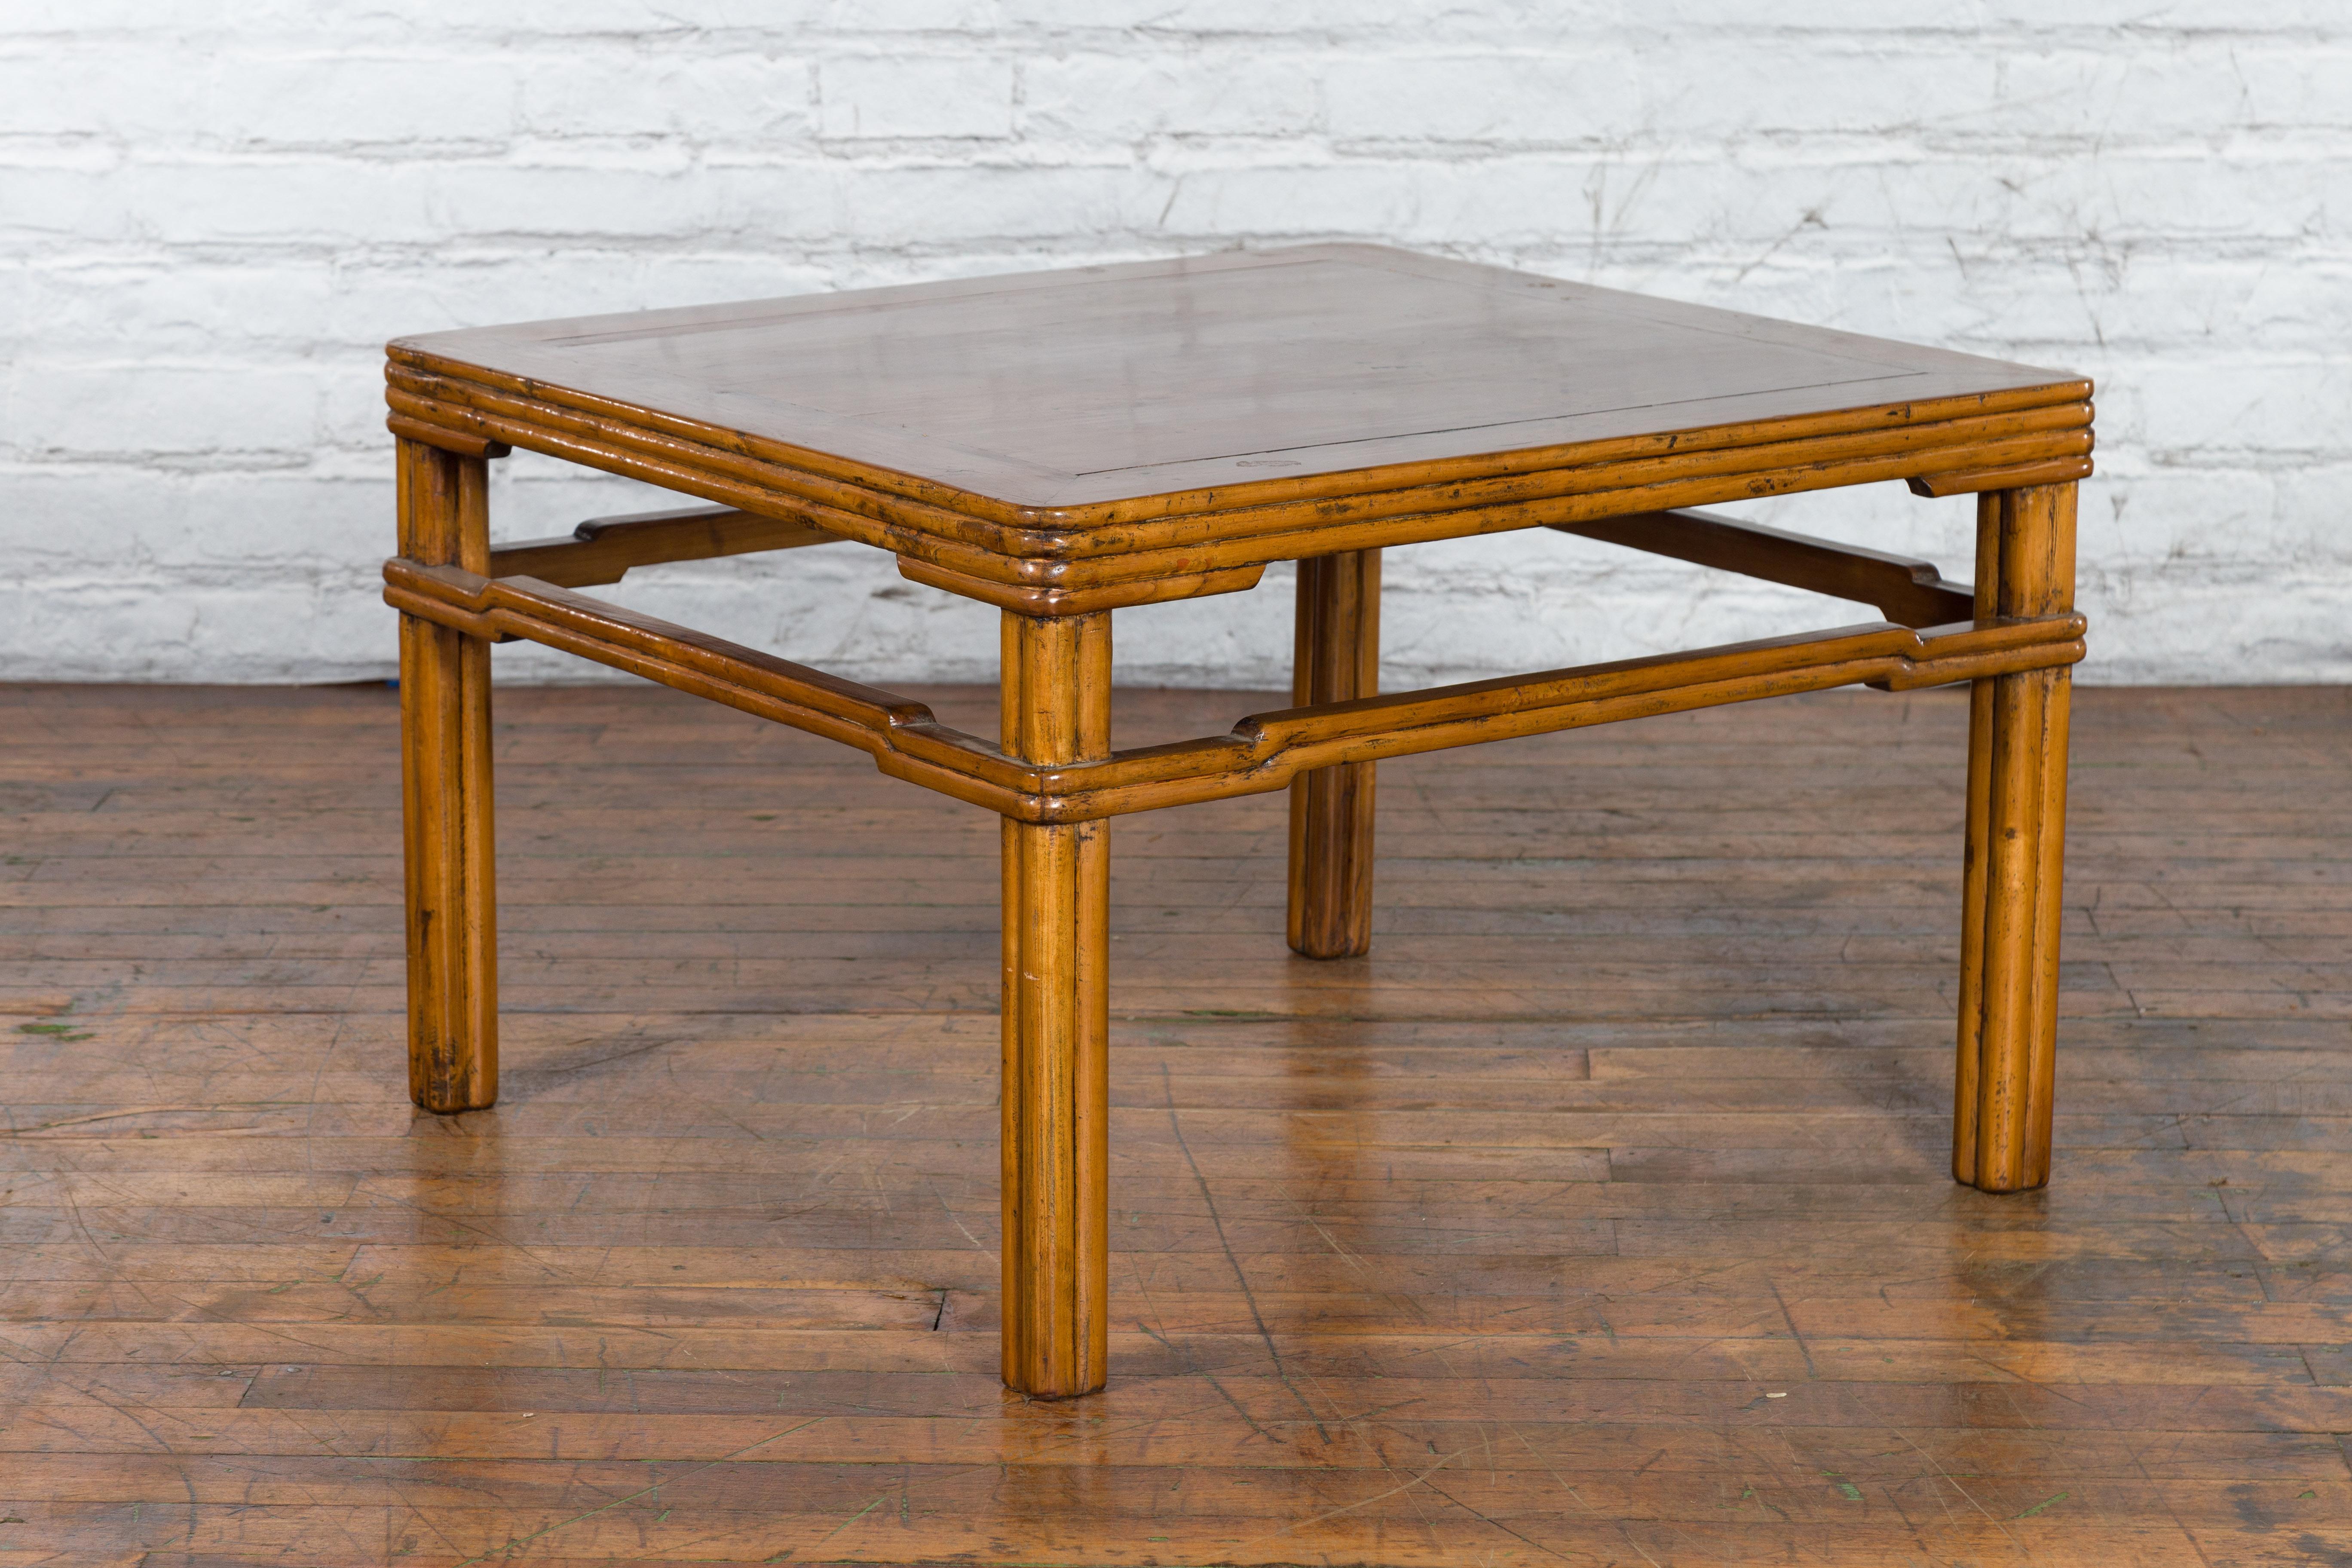 An antique Chinese low side table from the early 20th century, with reeded apron, humpback stretcher, straight legs and light brown lacquer. Created in China during the early years of the 20th century, this low side table features a square shaped